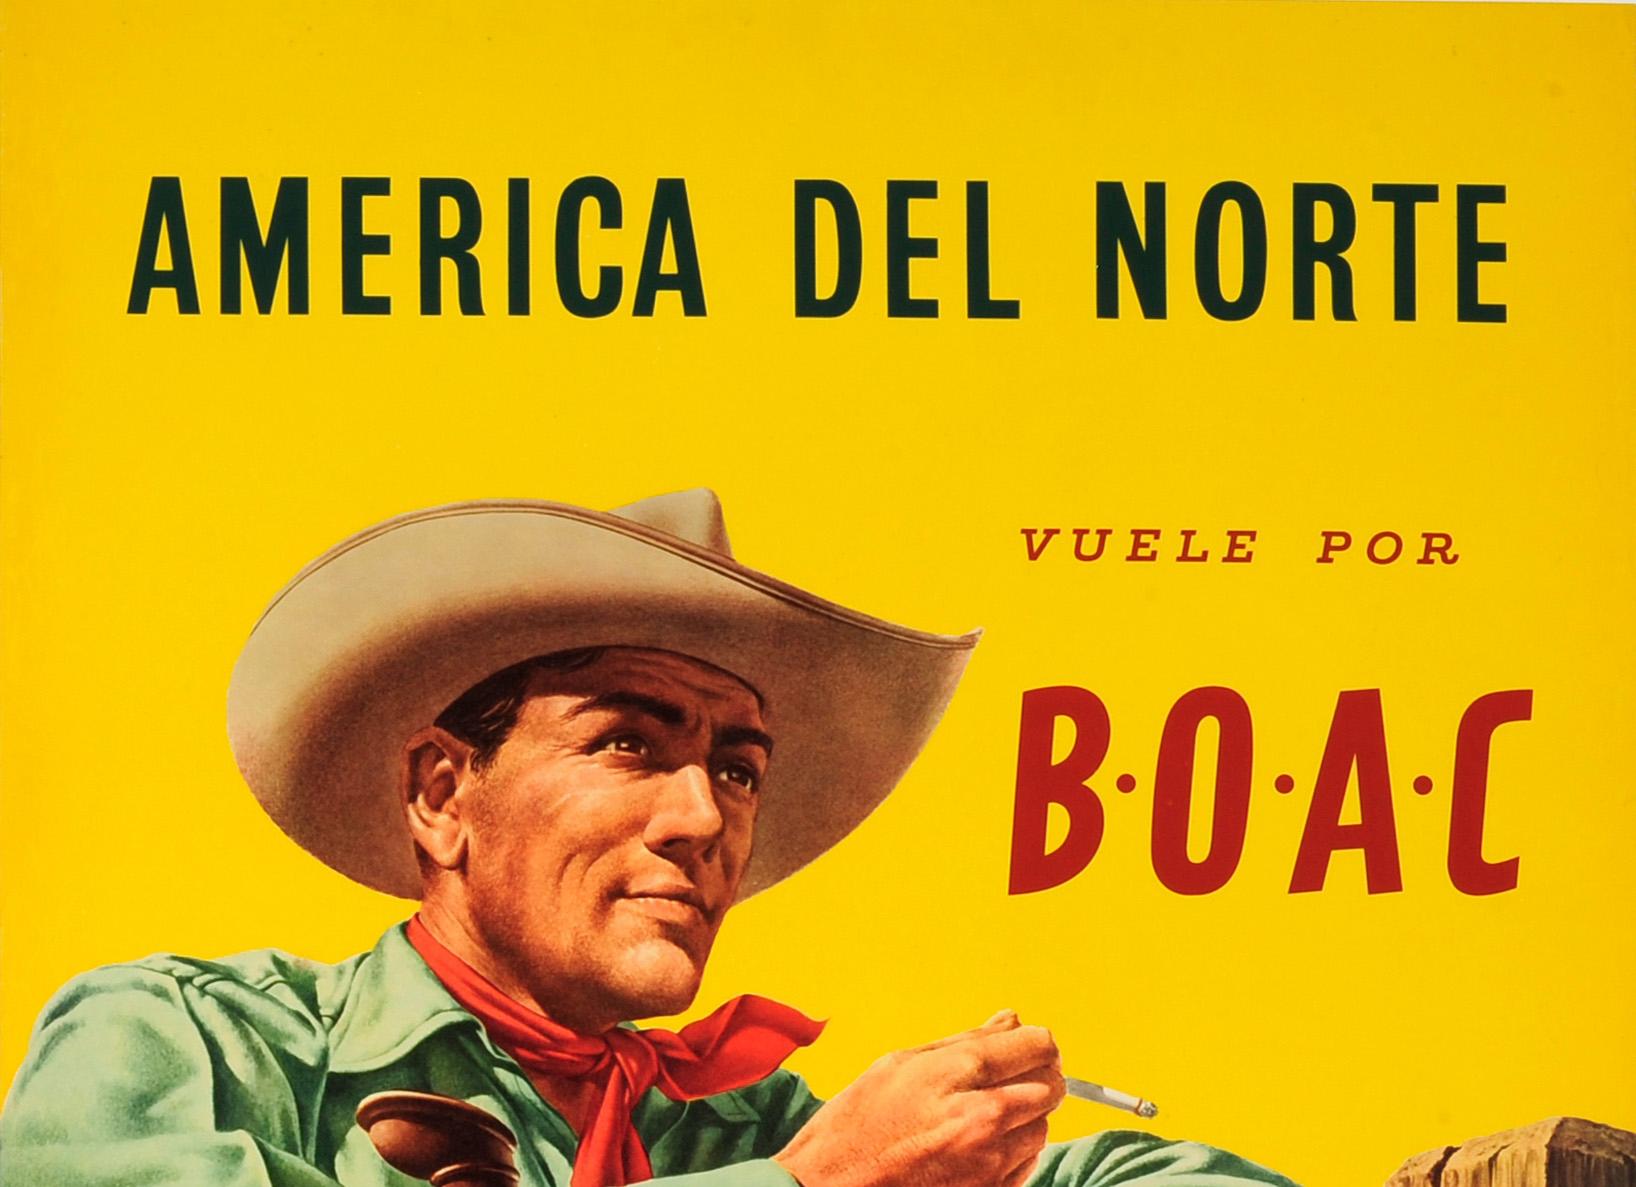 Original vintage travel advertising poster promoting flights to North America - America Del Norte vuele por BOAC / North America fly by BOAC - featuring a cowboy wearing a hat and leaning on a saddle on a wooden fence, holding a lasso in one hand